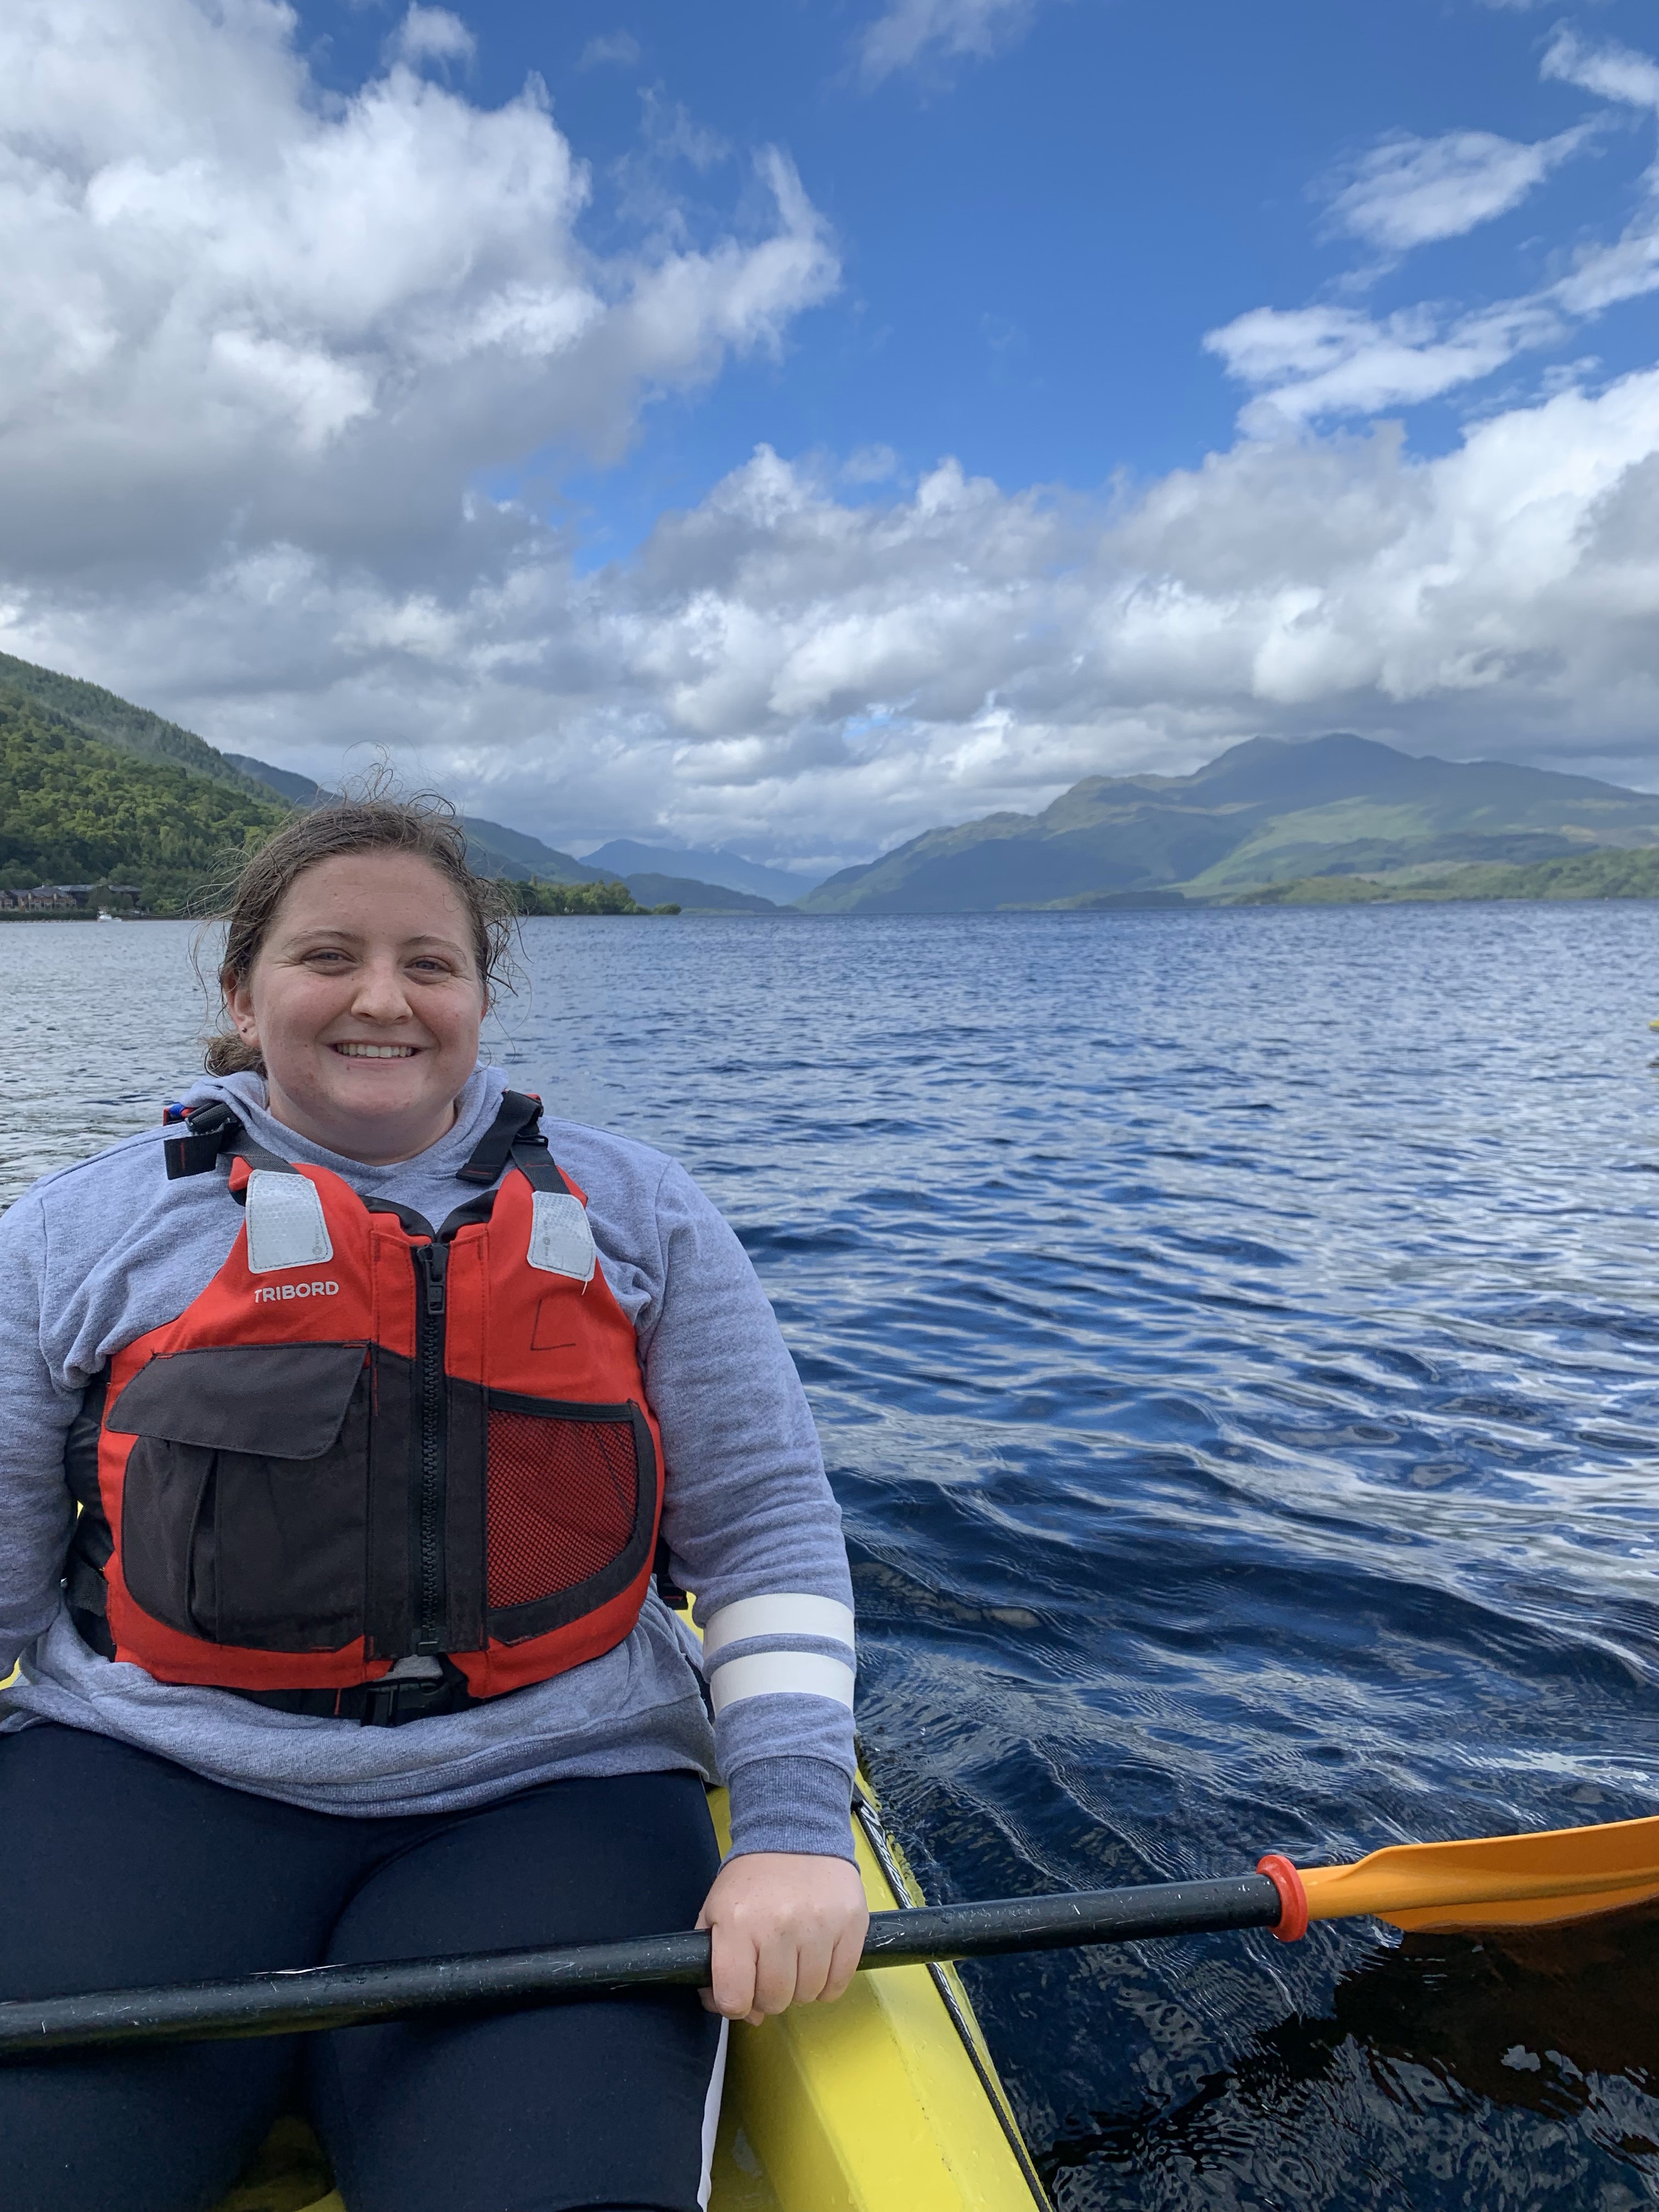 I was able to kayak on Loch Lomond in Scotland!